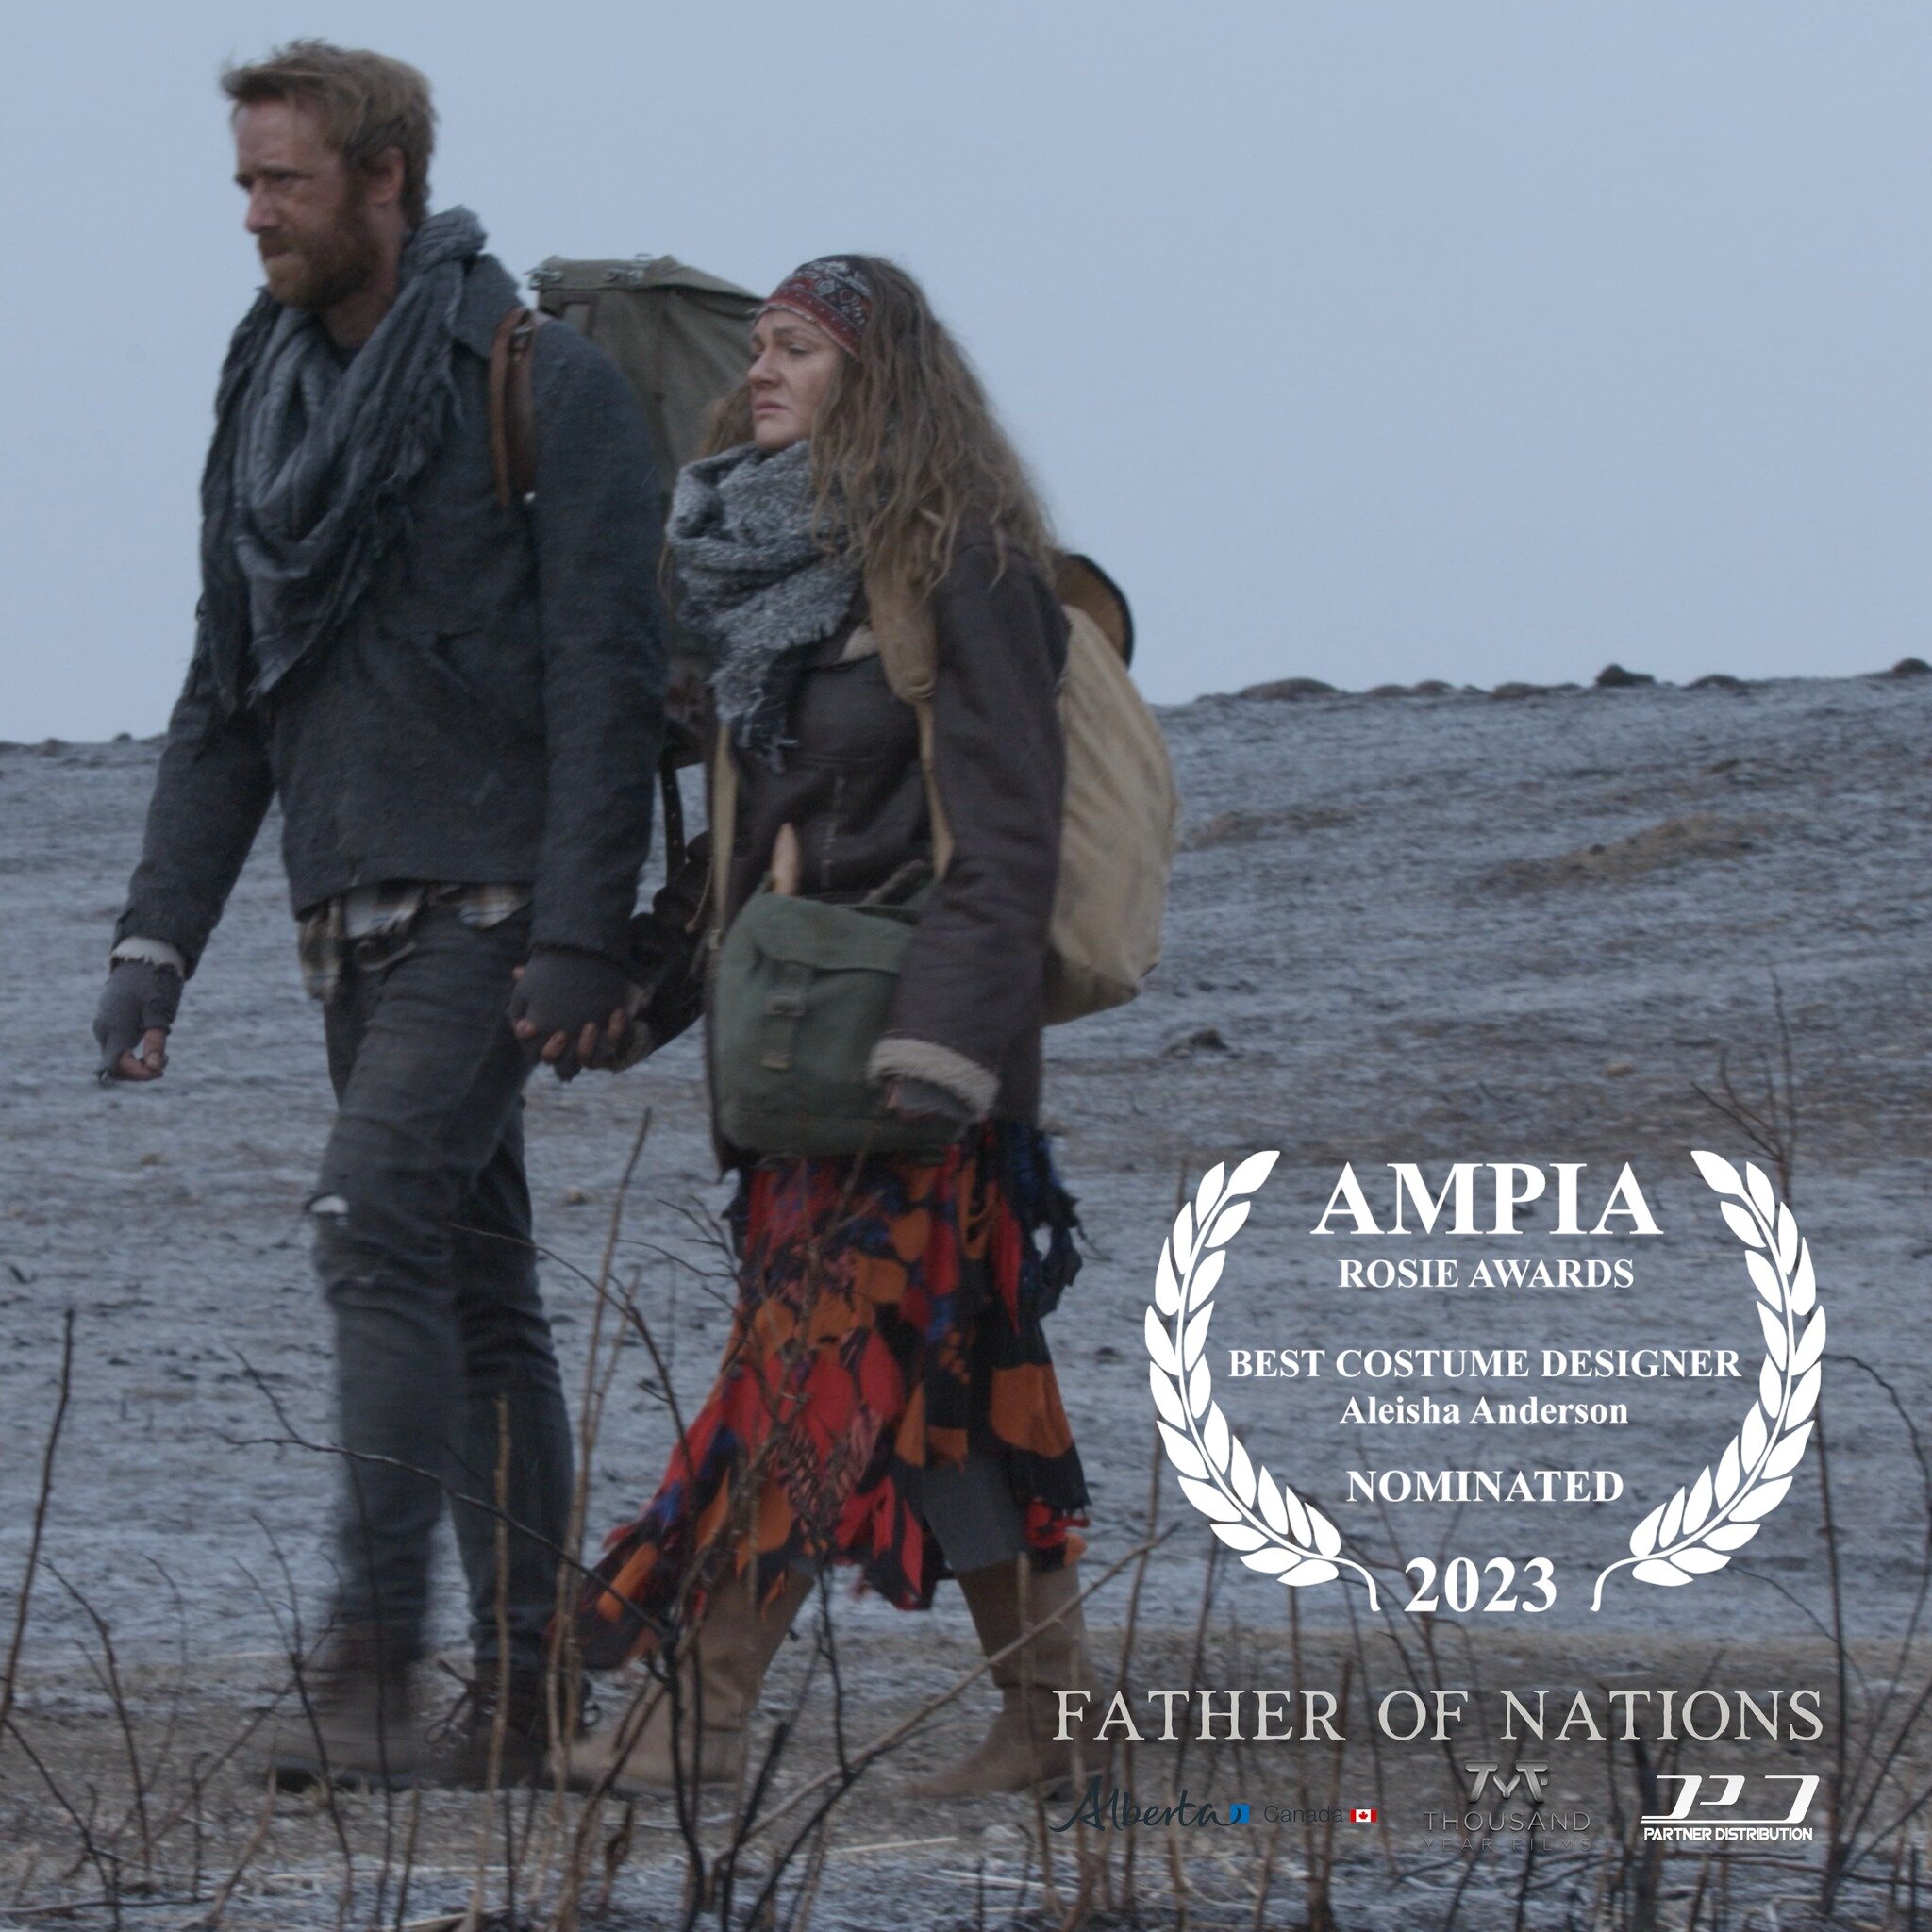 We are excited to announce an @yourampia nomination for Best Costume Designer for @aleisha_anderson in the @fatherofnationsfilm . Throughout this epic film the character's journey spans over a decade and all of the seasons - crafting a wardrobe desig